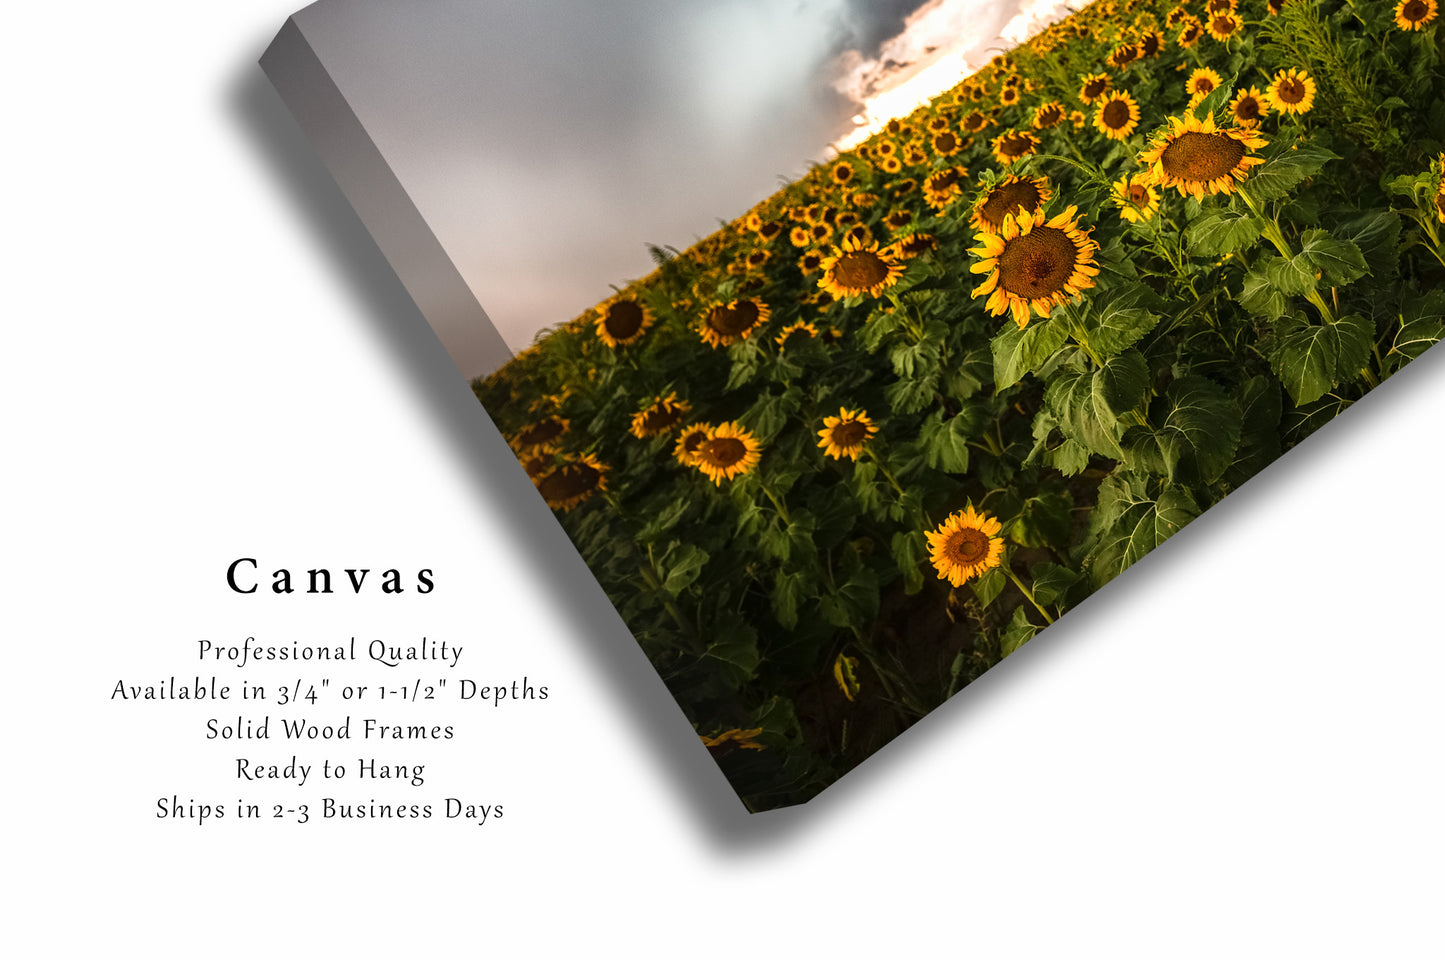 Country Canvas Wall Art (Ready to Hang) Gallery Wrap of Sunflowers Facing Away from Storm in Kansas Farm Photography Farmhouse Decor